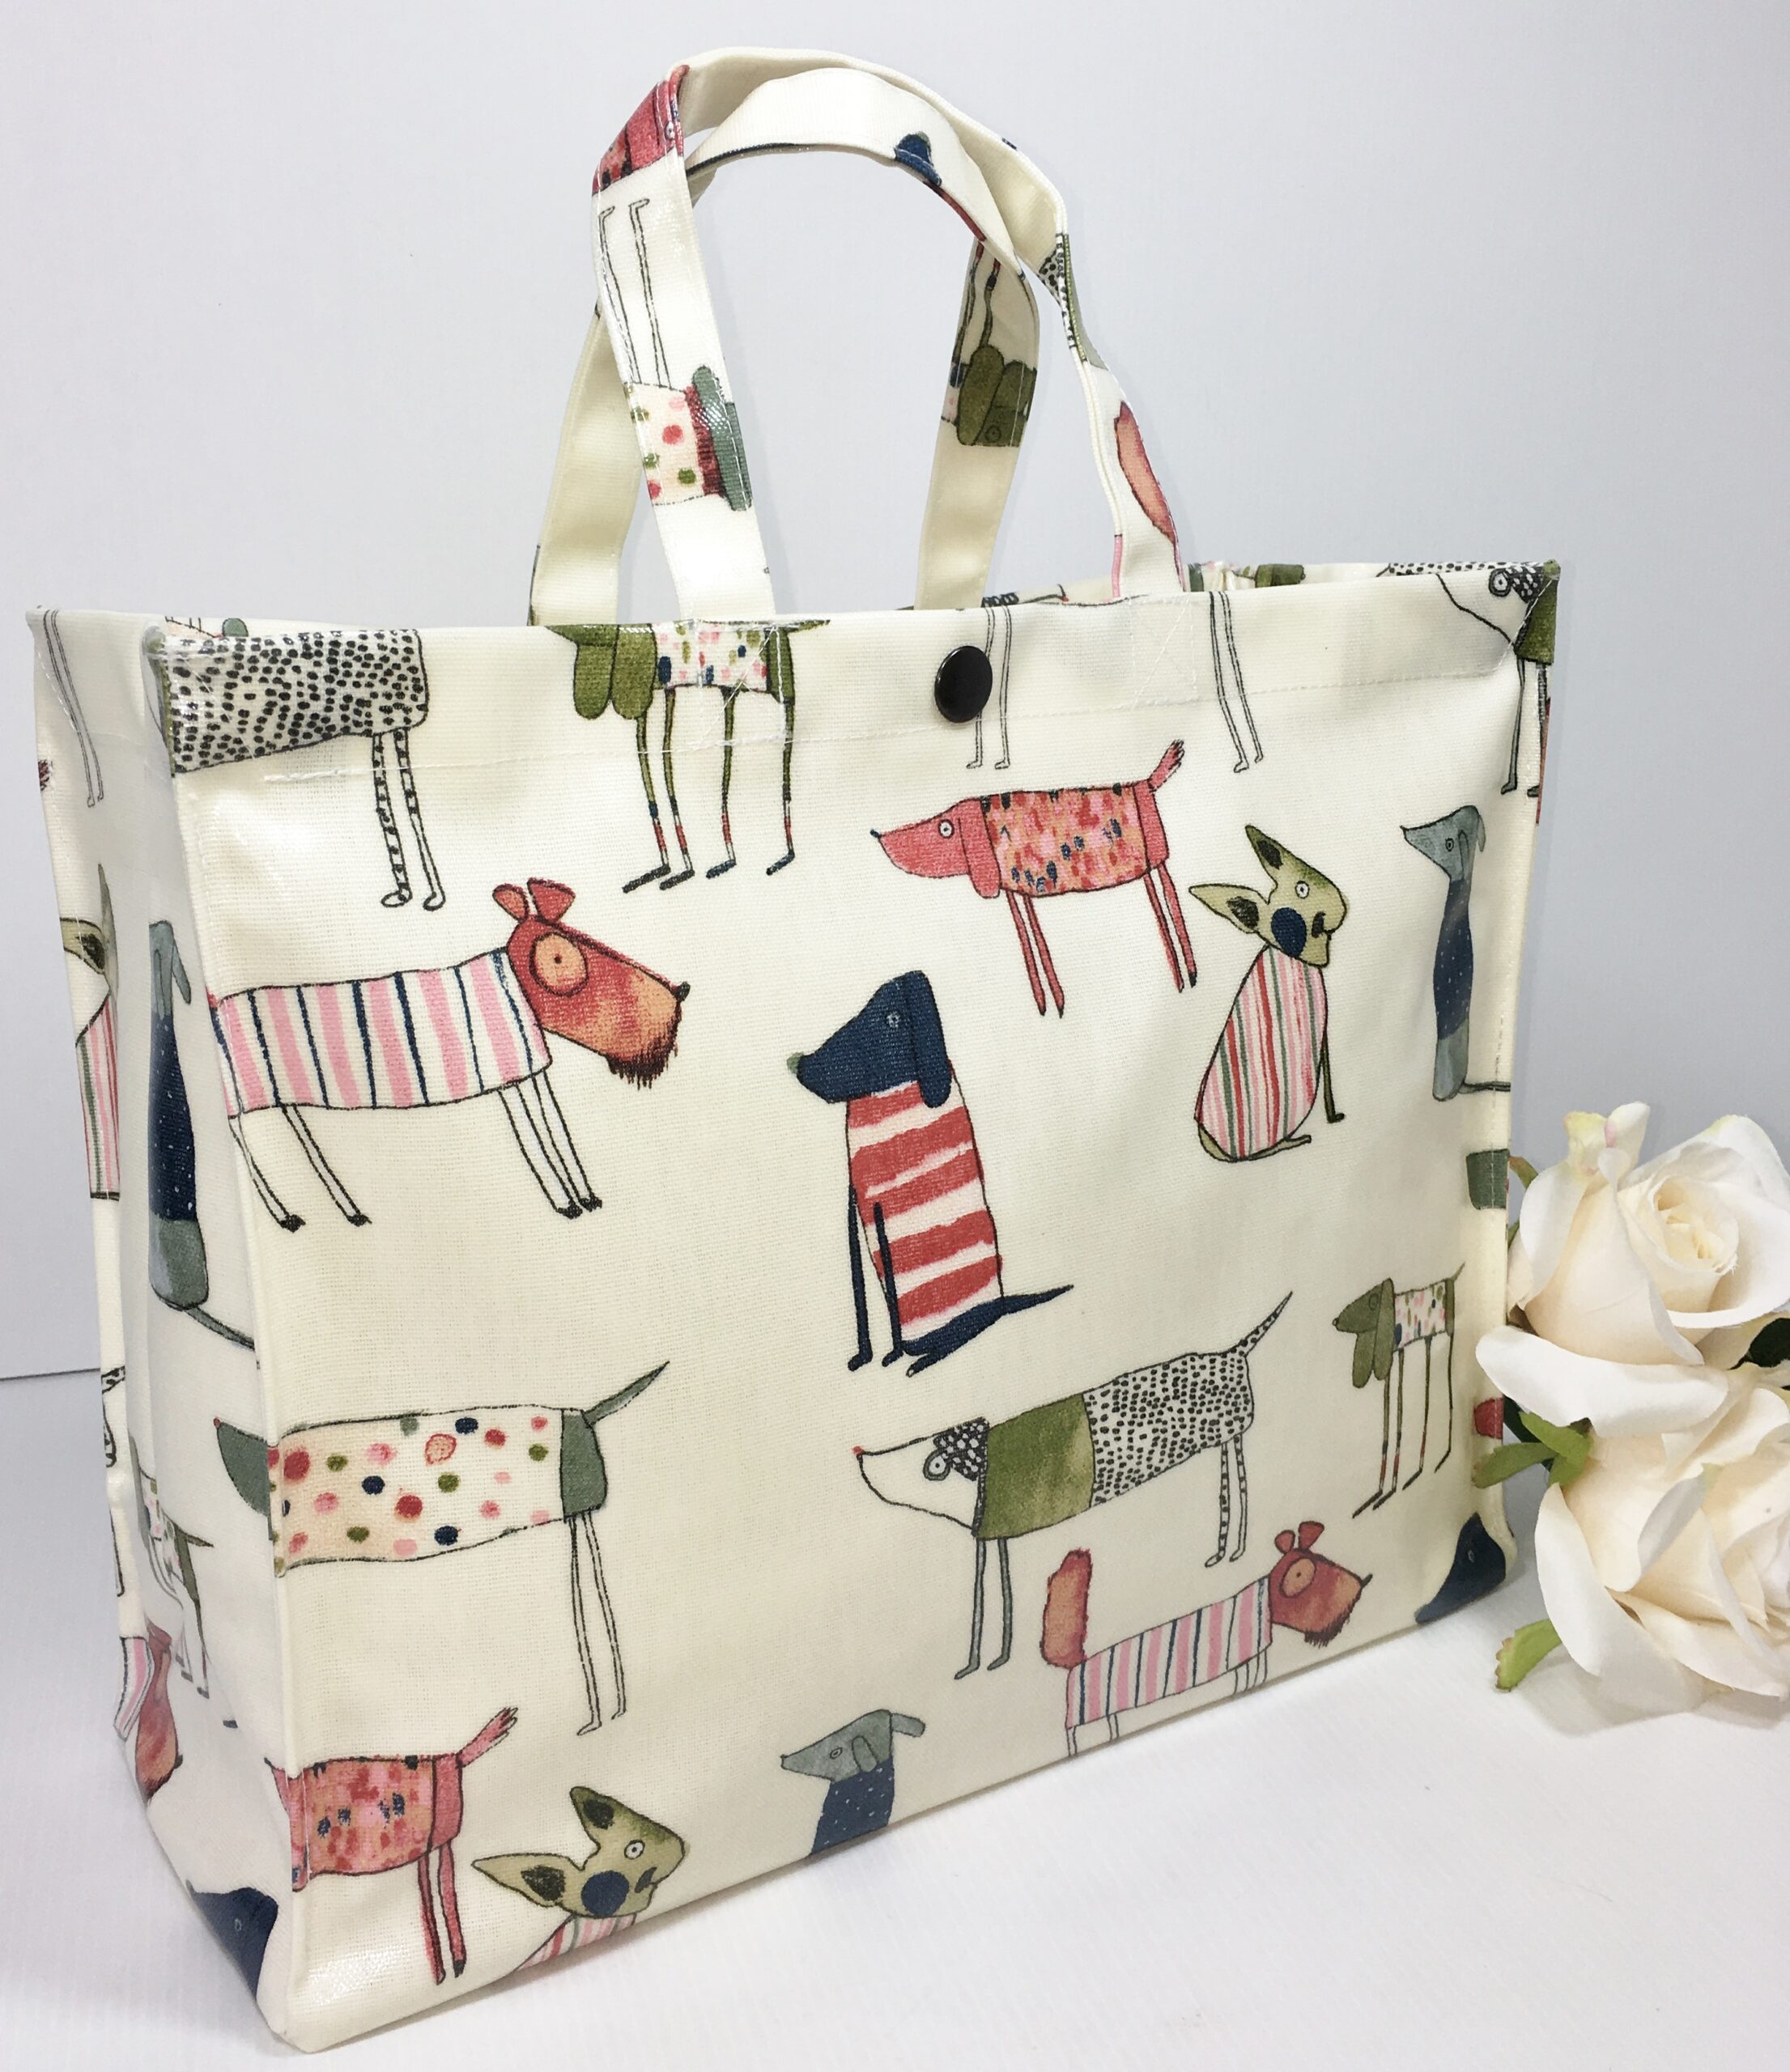 TOTO IN PAINTBOX GLOSS (DOGS) - Nikki's Original Totes